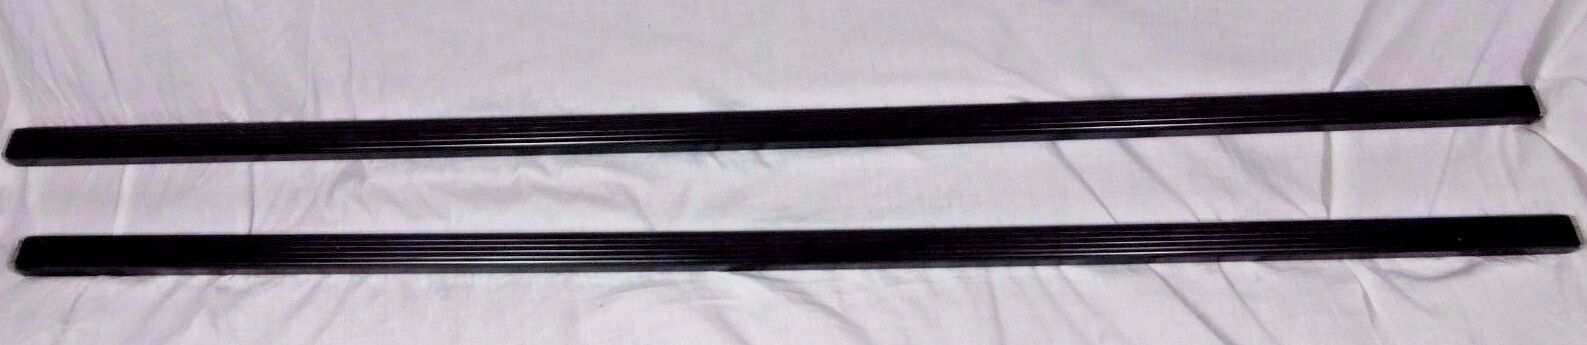 Thule OEM Crossbars For Land Rover Discovery II 1999-2003 With Raised Roof Rails